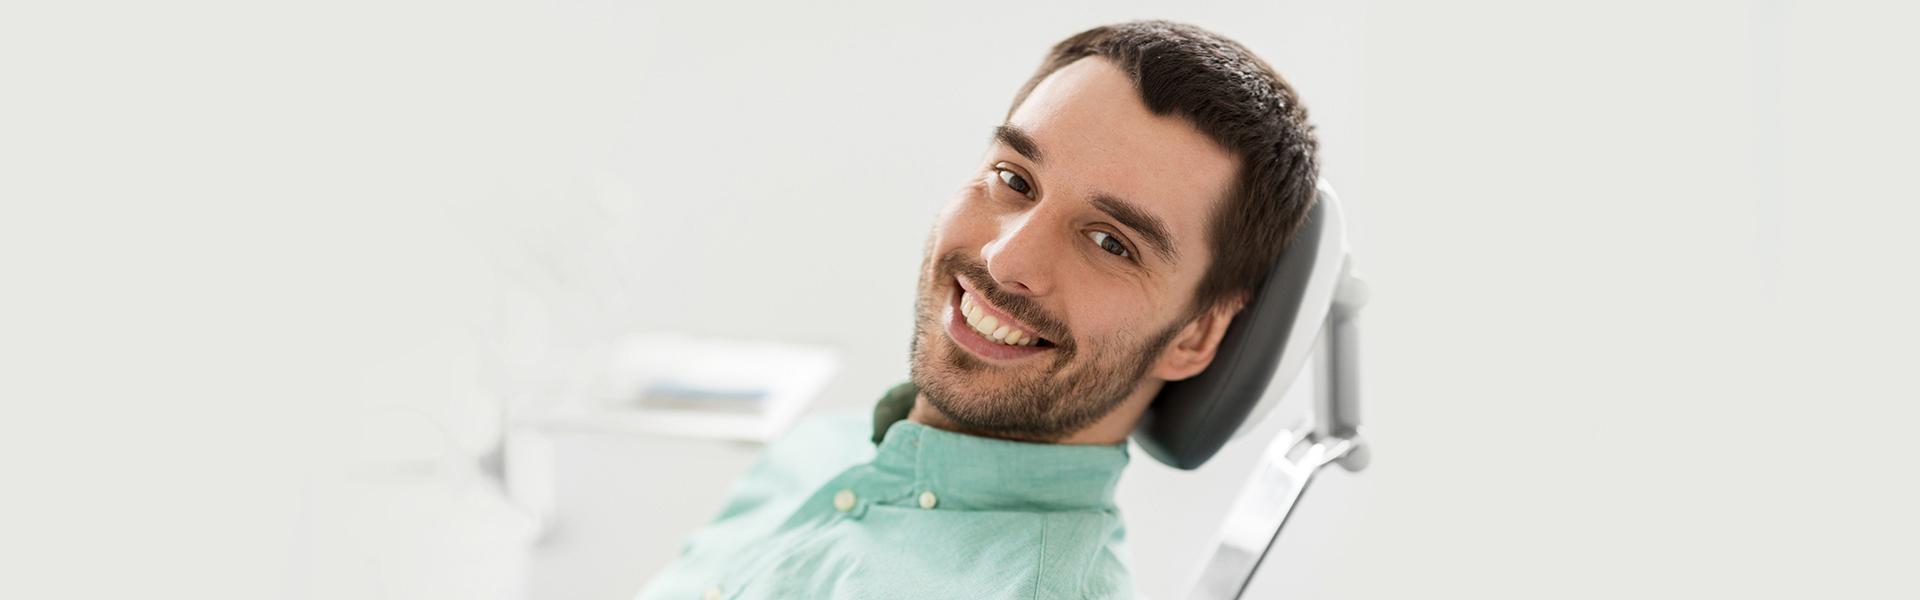 Types of Oral Procedures Performed by Endodontists